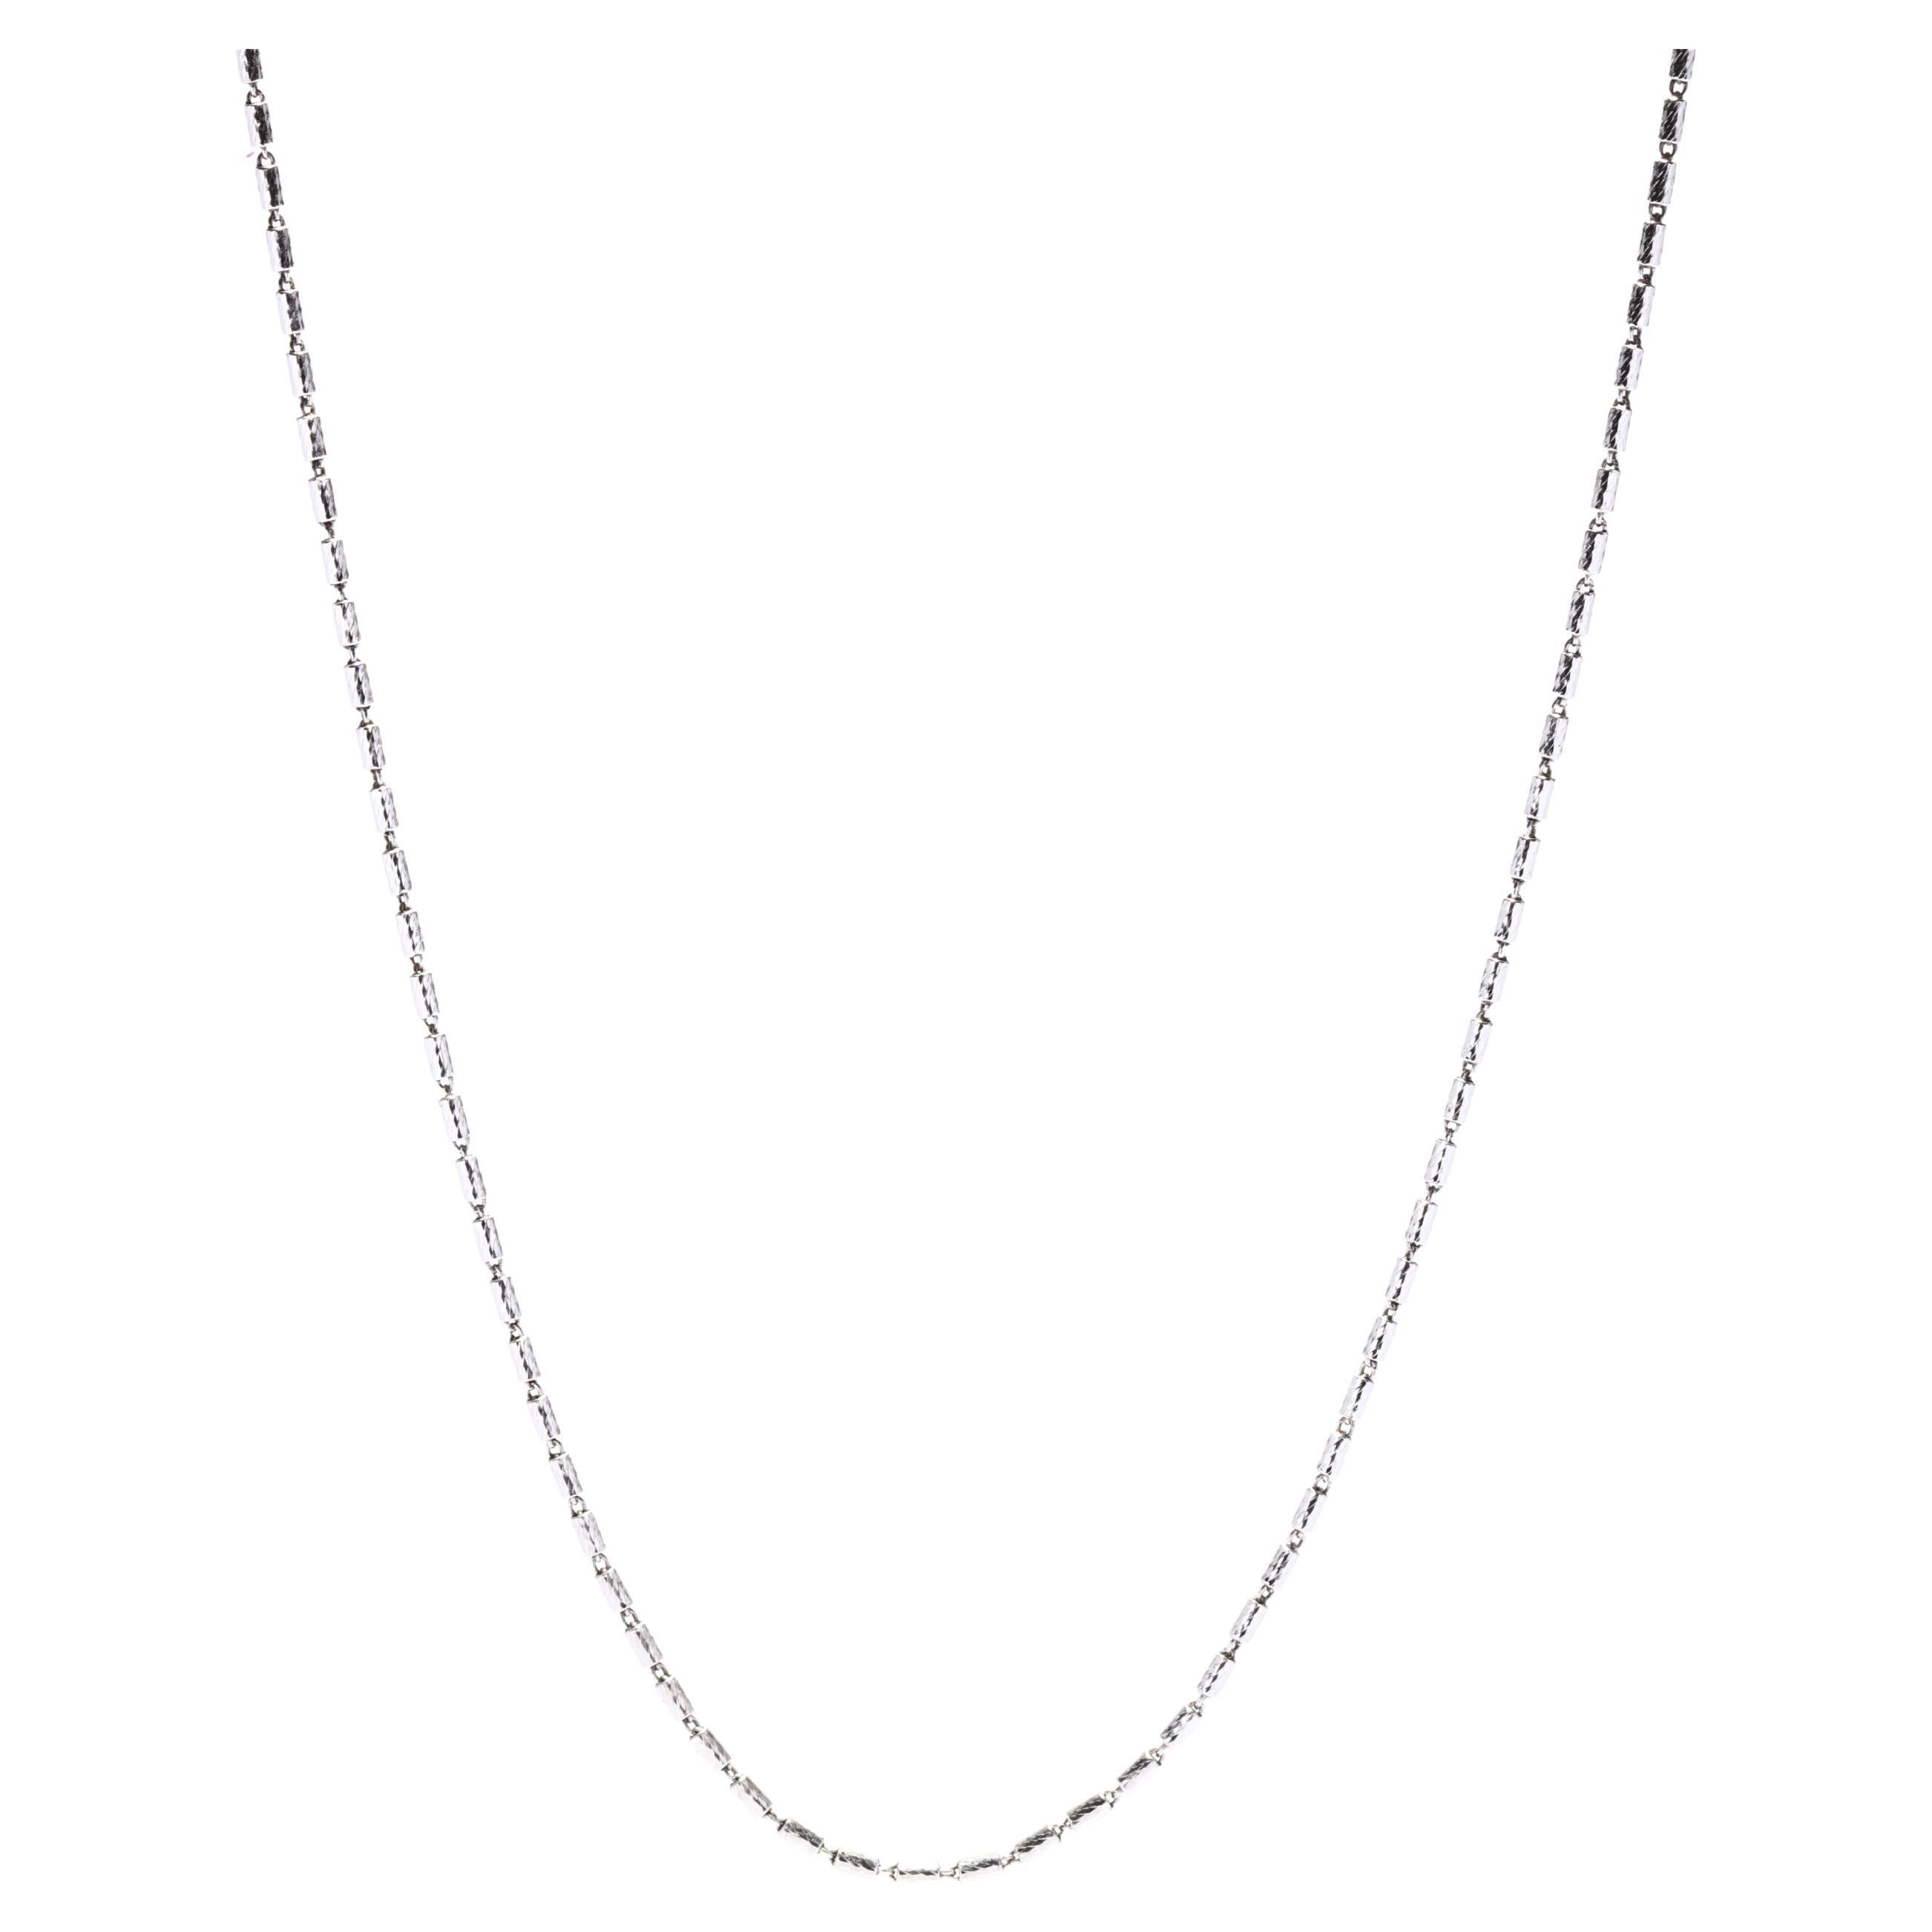 Italian Textured Barrel Bead Chain, 14K White Gold, Length 18.25 Inch For Sale